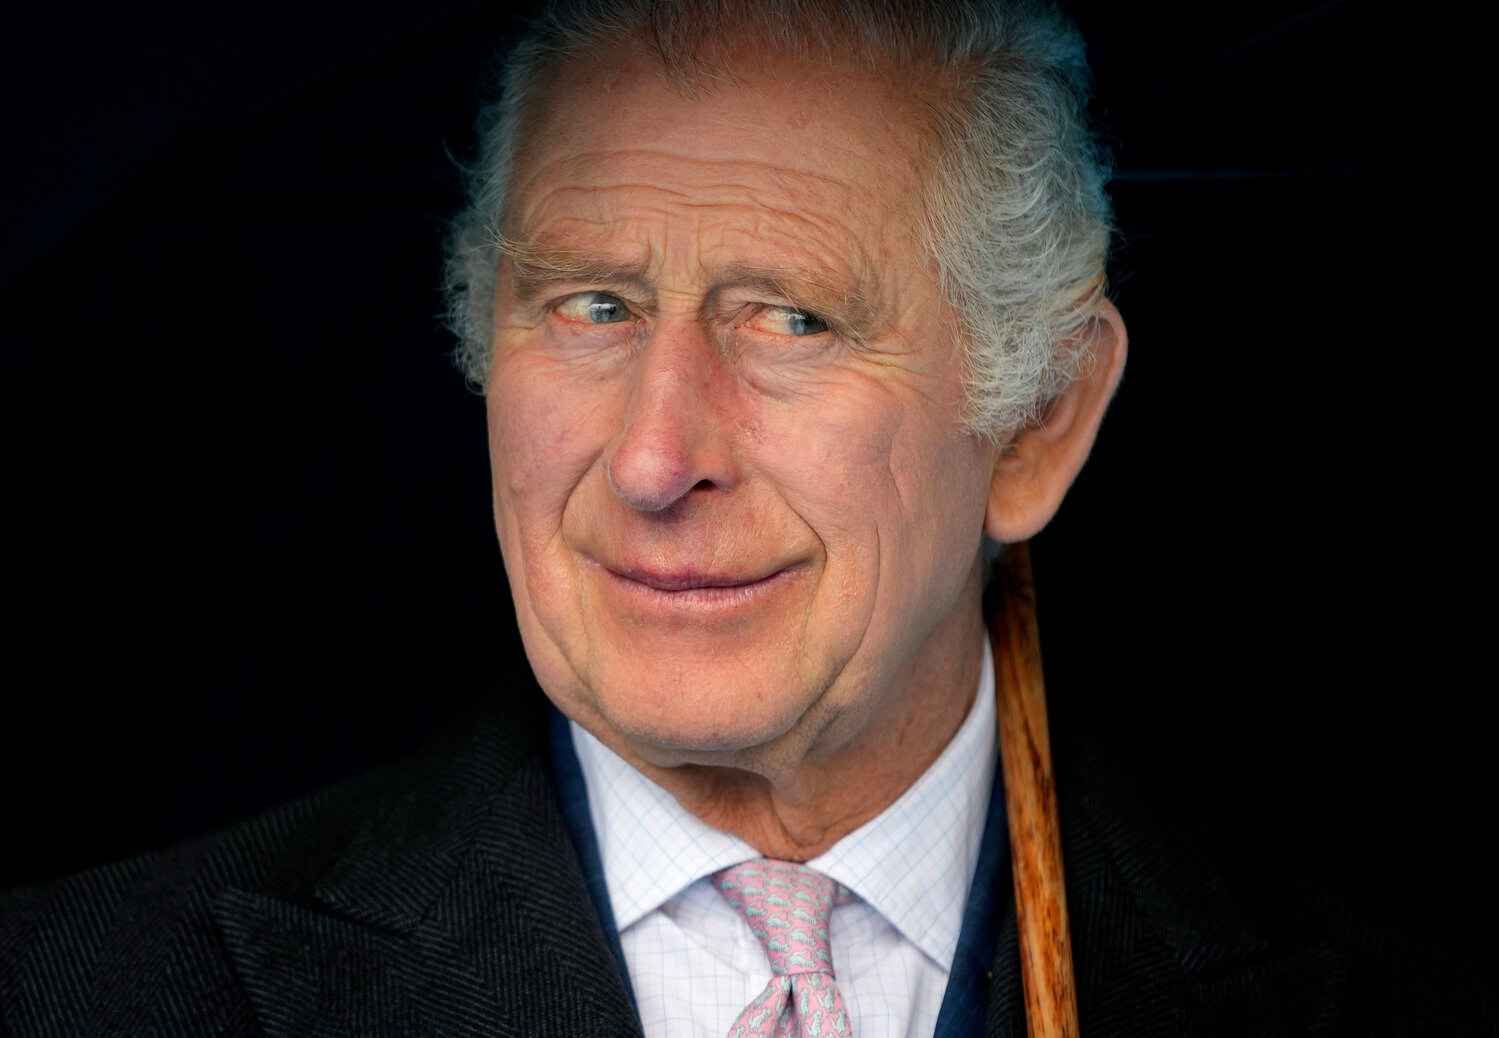 FILE - Britain's King Charles III smiles during a boat trip, in Hamburg, Germany, Friday, March 31, 2023. King Charles III arrived Wednesday for a three-day official visit to Germany. Britainâs royal family turns the page on a new chapter with the coronation of King Charles III. Charles ascended the throne when his mother, Queen Elizabeth II, died last year. But the coronation Saturday is a religious ceremony that provides a more formal confirmation of his role as head of state and titular head of the Church of England. (AP Photo/Matthias Schrader, Pool, File)